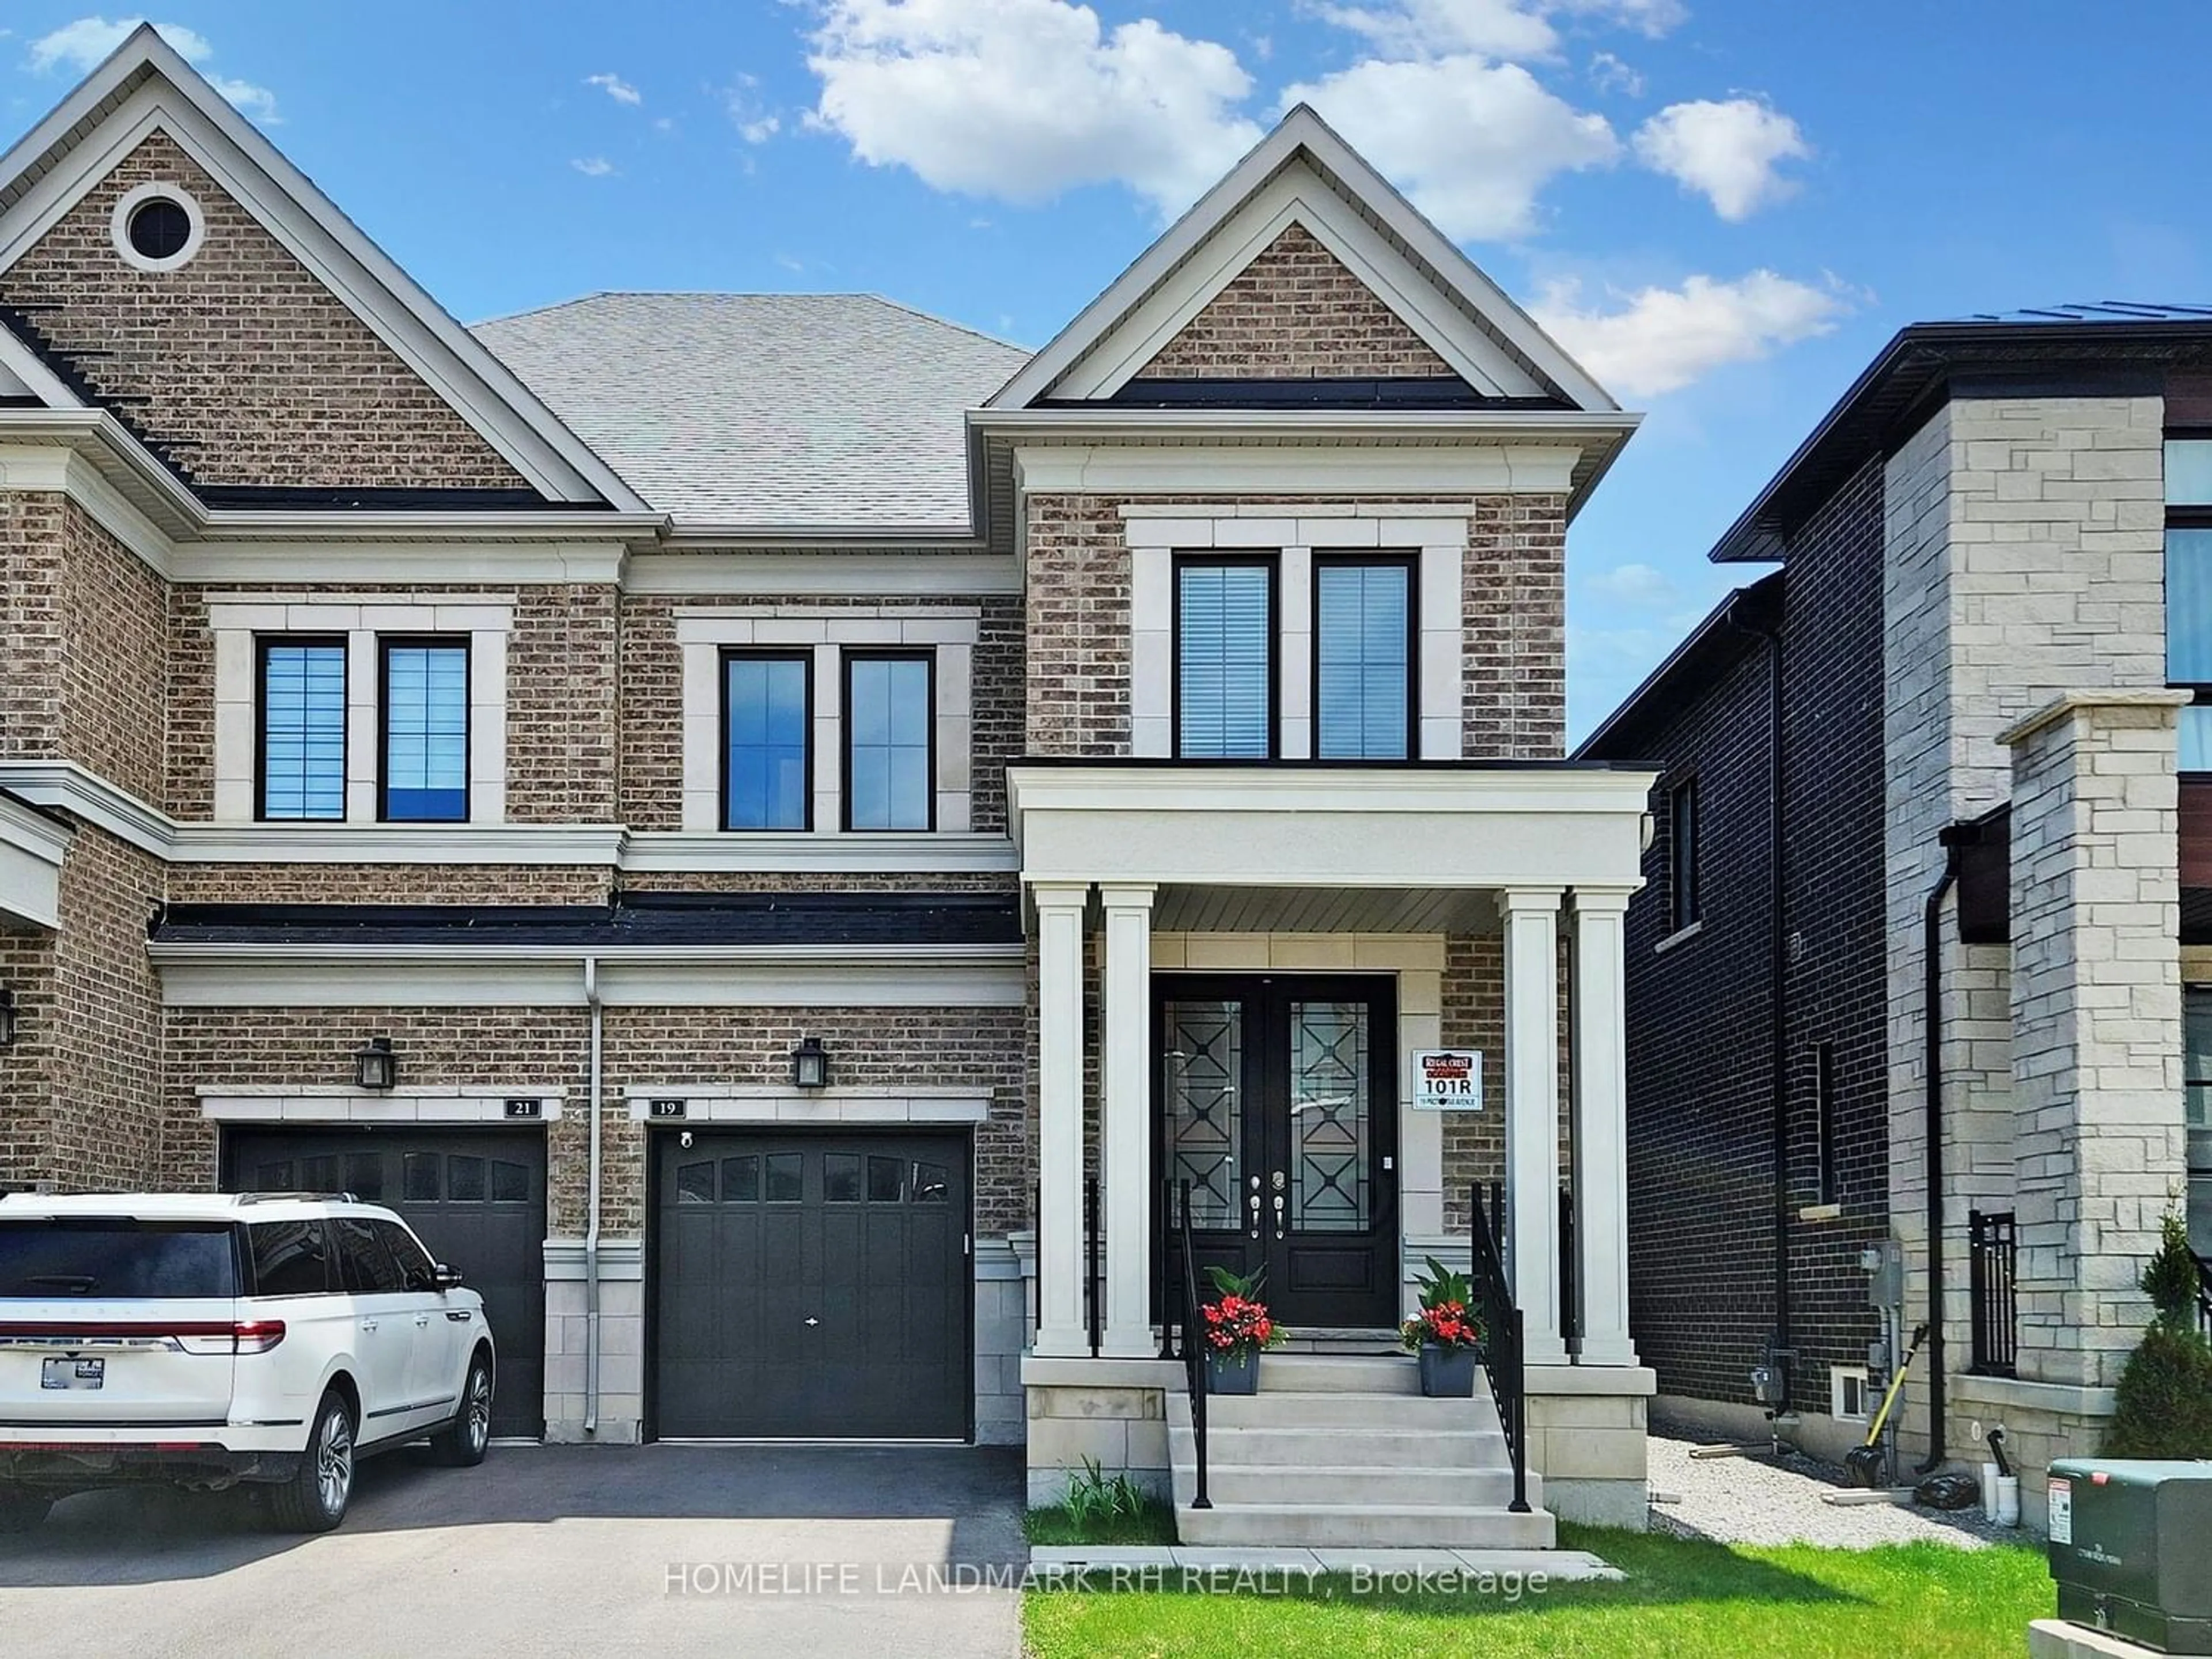 Home with brick exterior material for 19 Protostar Ave, Richmond Hill Ontario L4C 4Z2